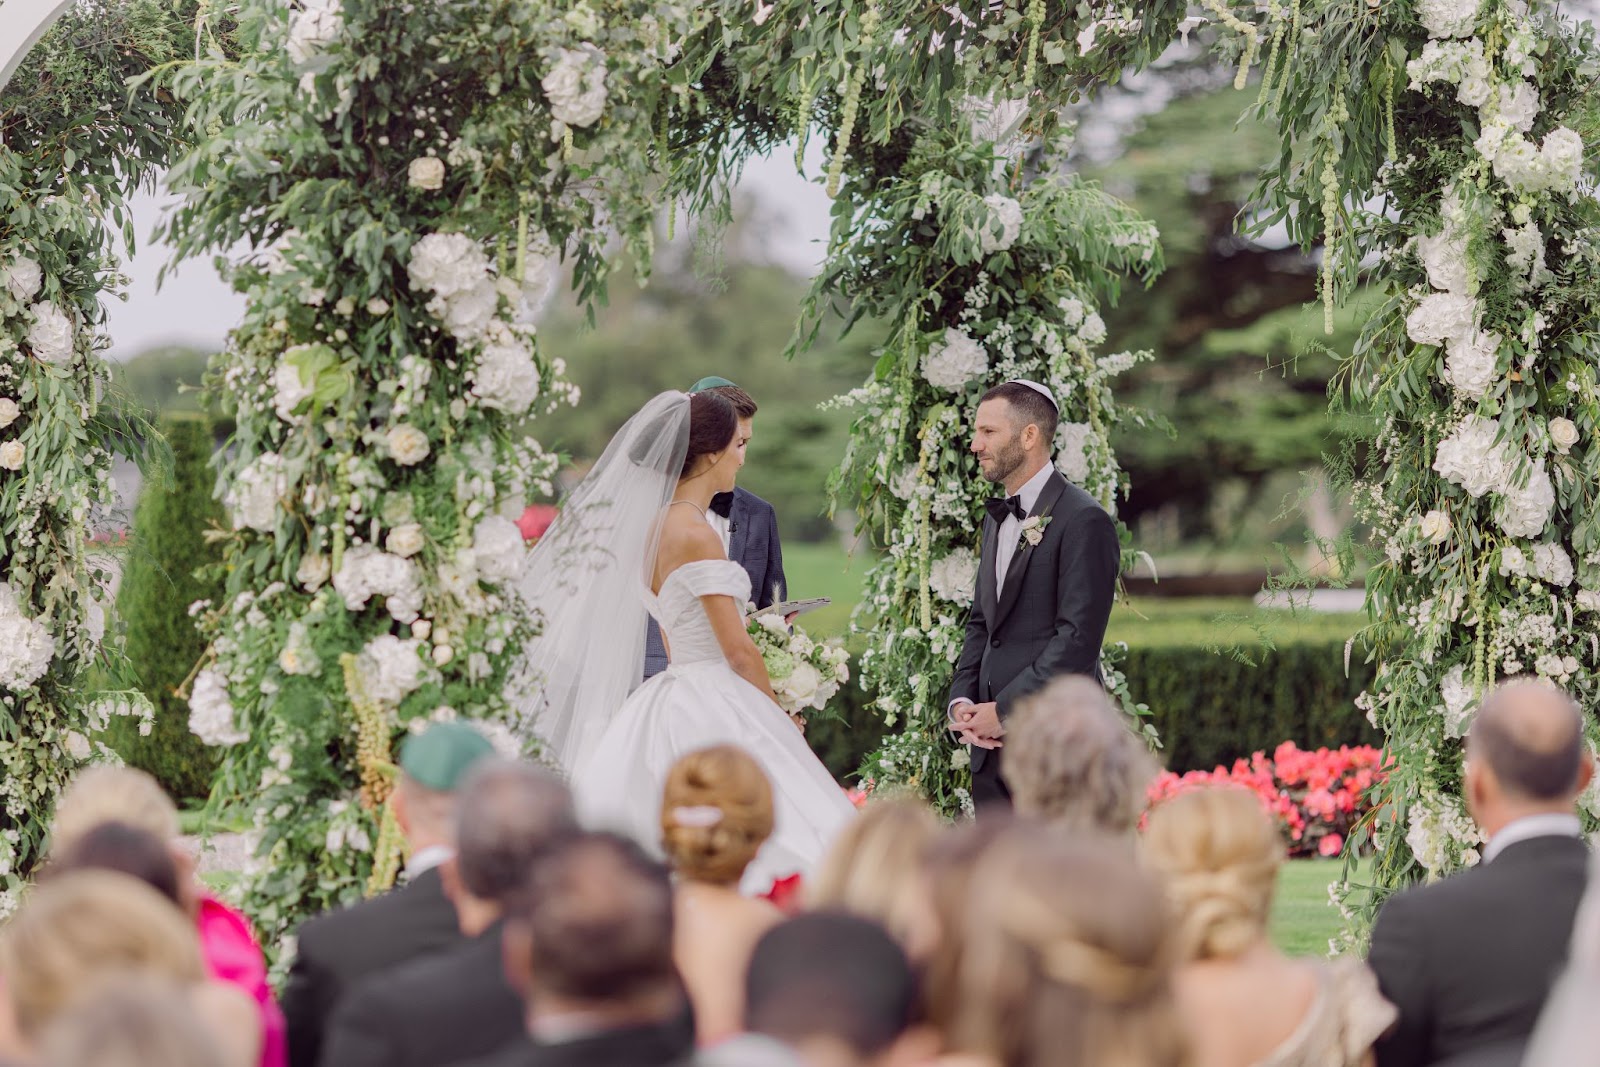 Beautiful couple surrounded by florals by Tara Fay.